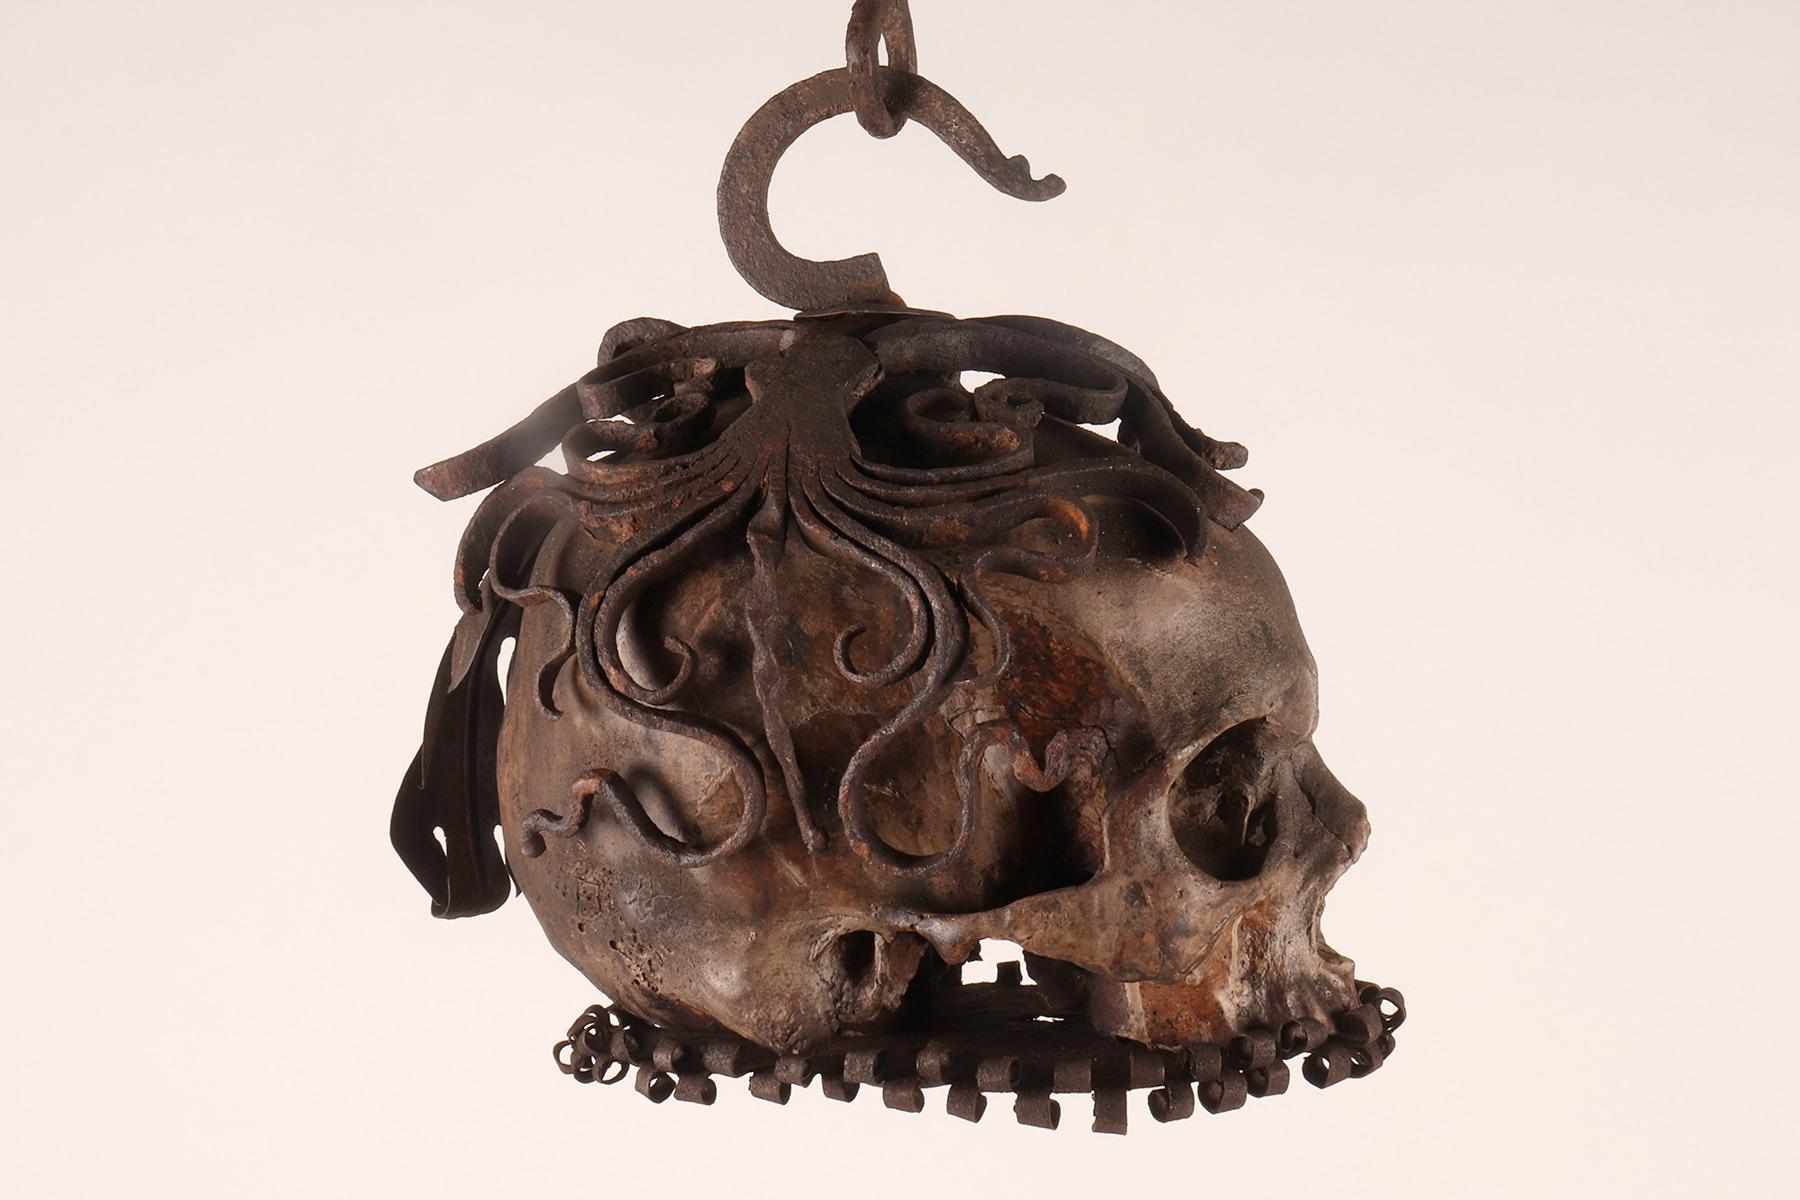 Memento mori. A caged and suspended skull sculpture, Germany, late 17th century. 2